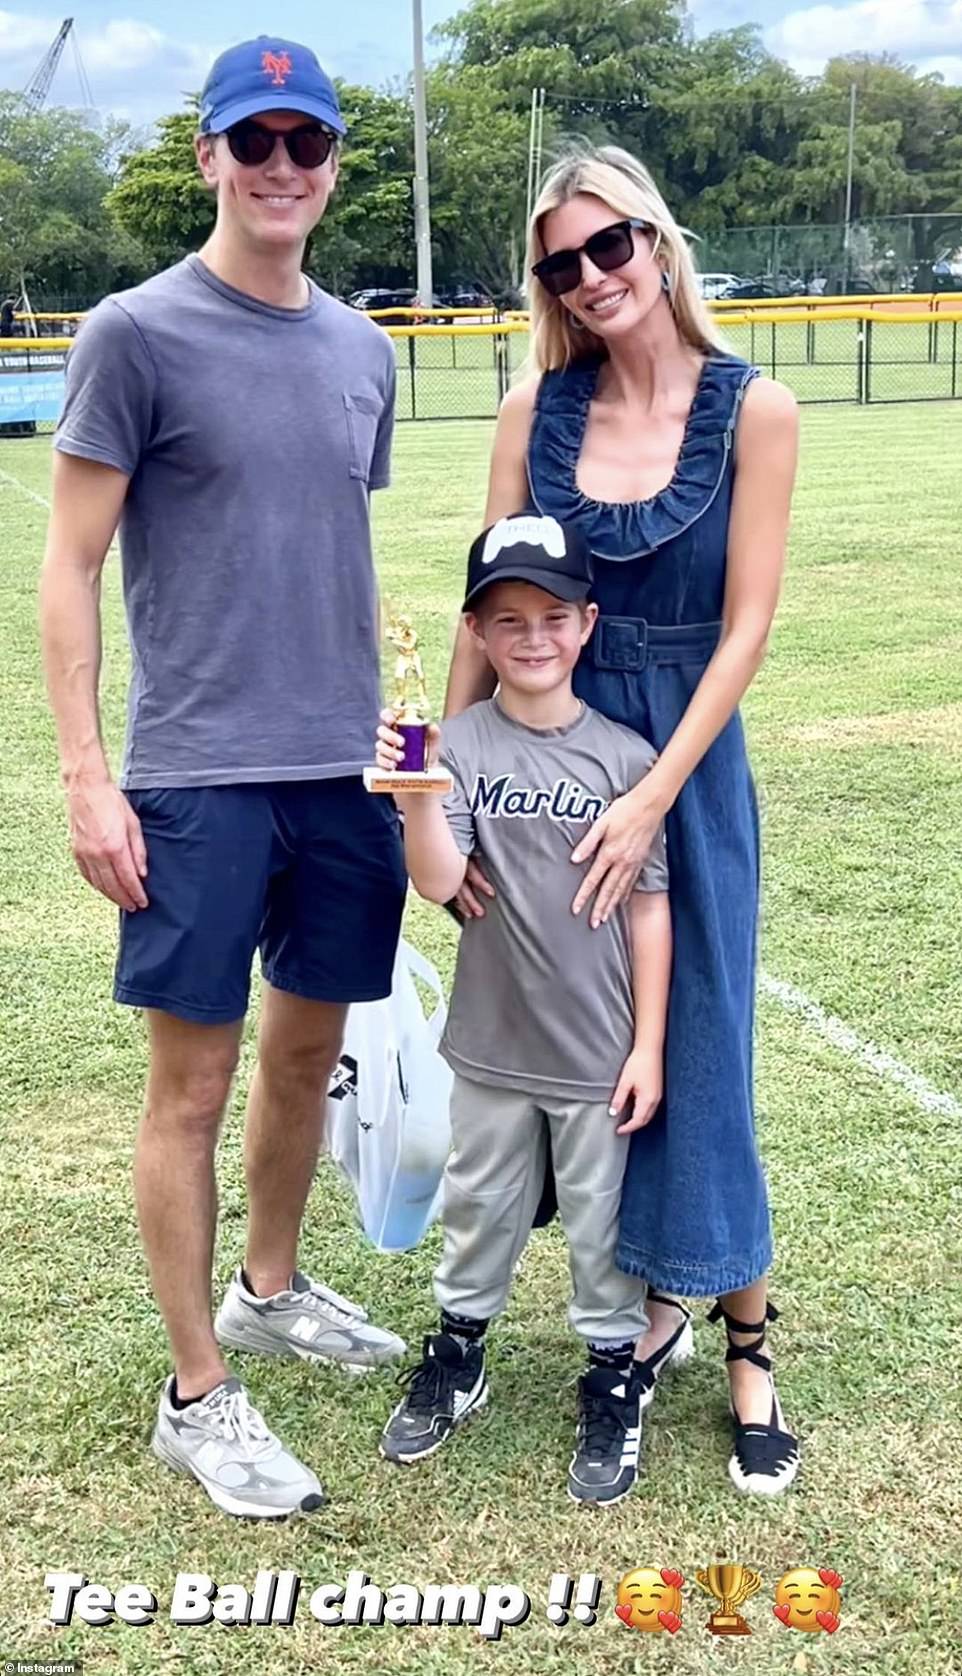 Ivanka later posted the snapshot of them on the field on her Instagram Stories with the caption: 'Tee Ball Champ!!'